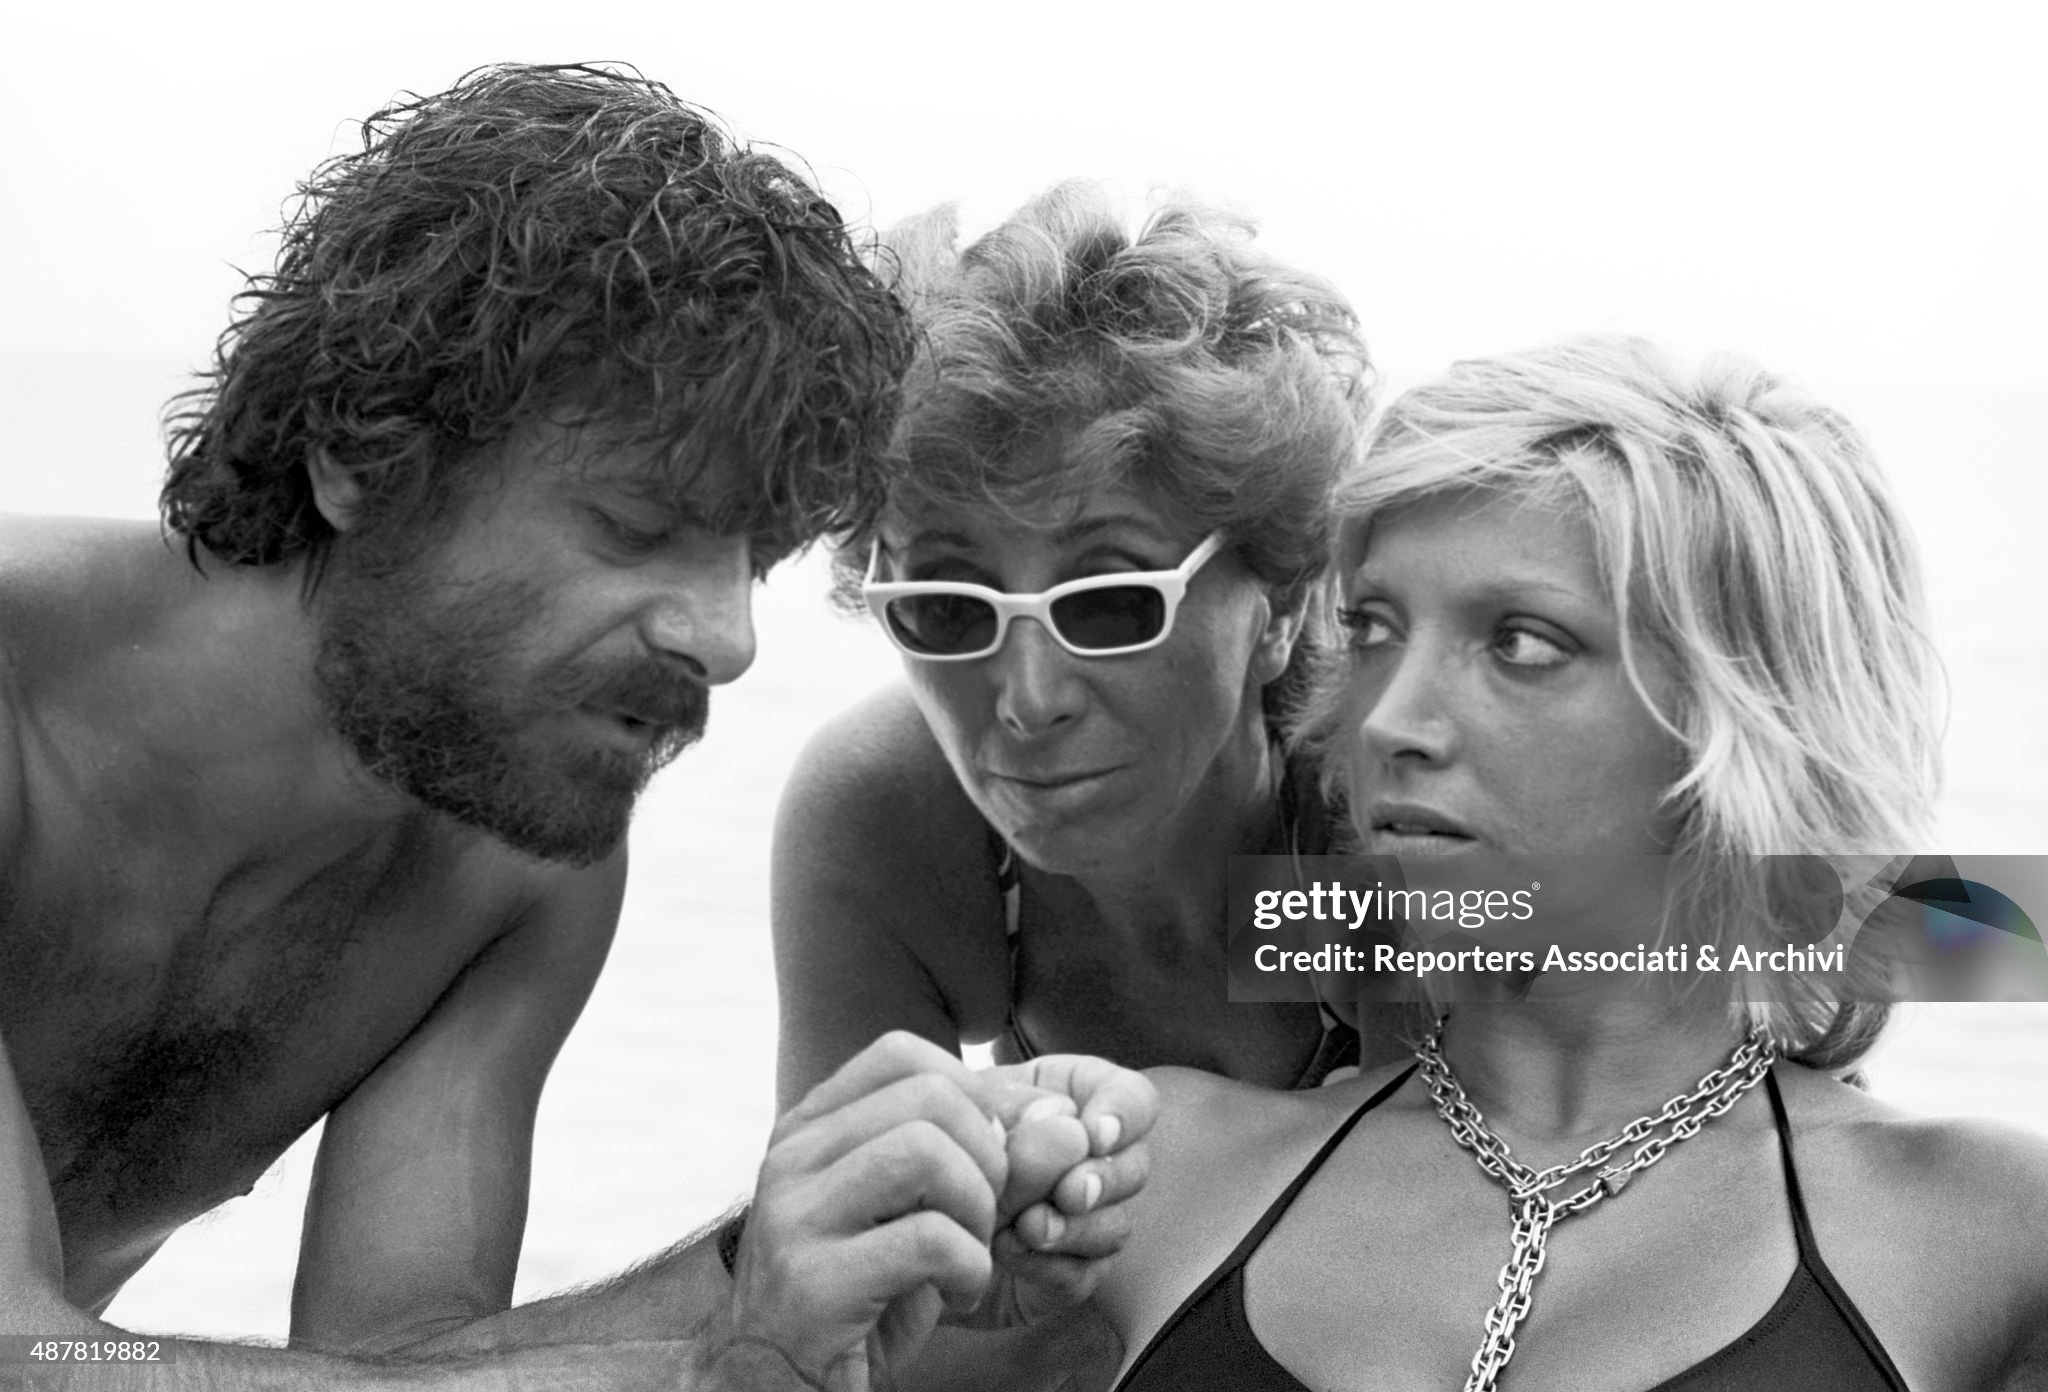 Italian director and scriptwriter Lina Wertmuller, Italian actor, director and scriptwriter Giancarlo Giannini and Italian actress Mariangela Melato discussing on the set of the film Swept away in Italy in 1974. 